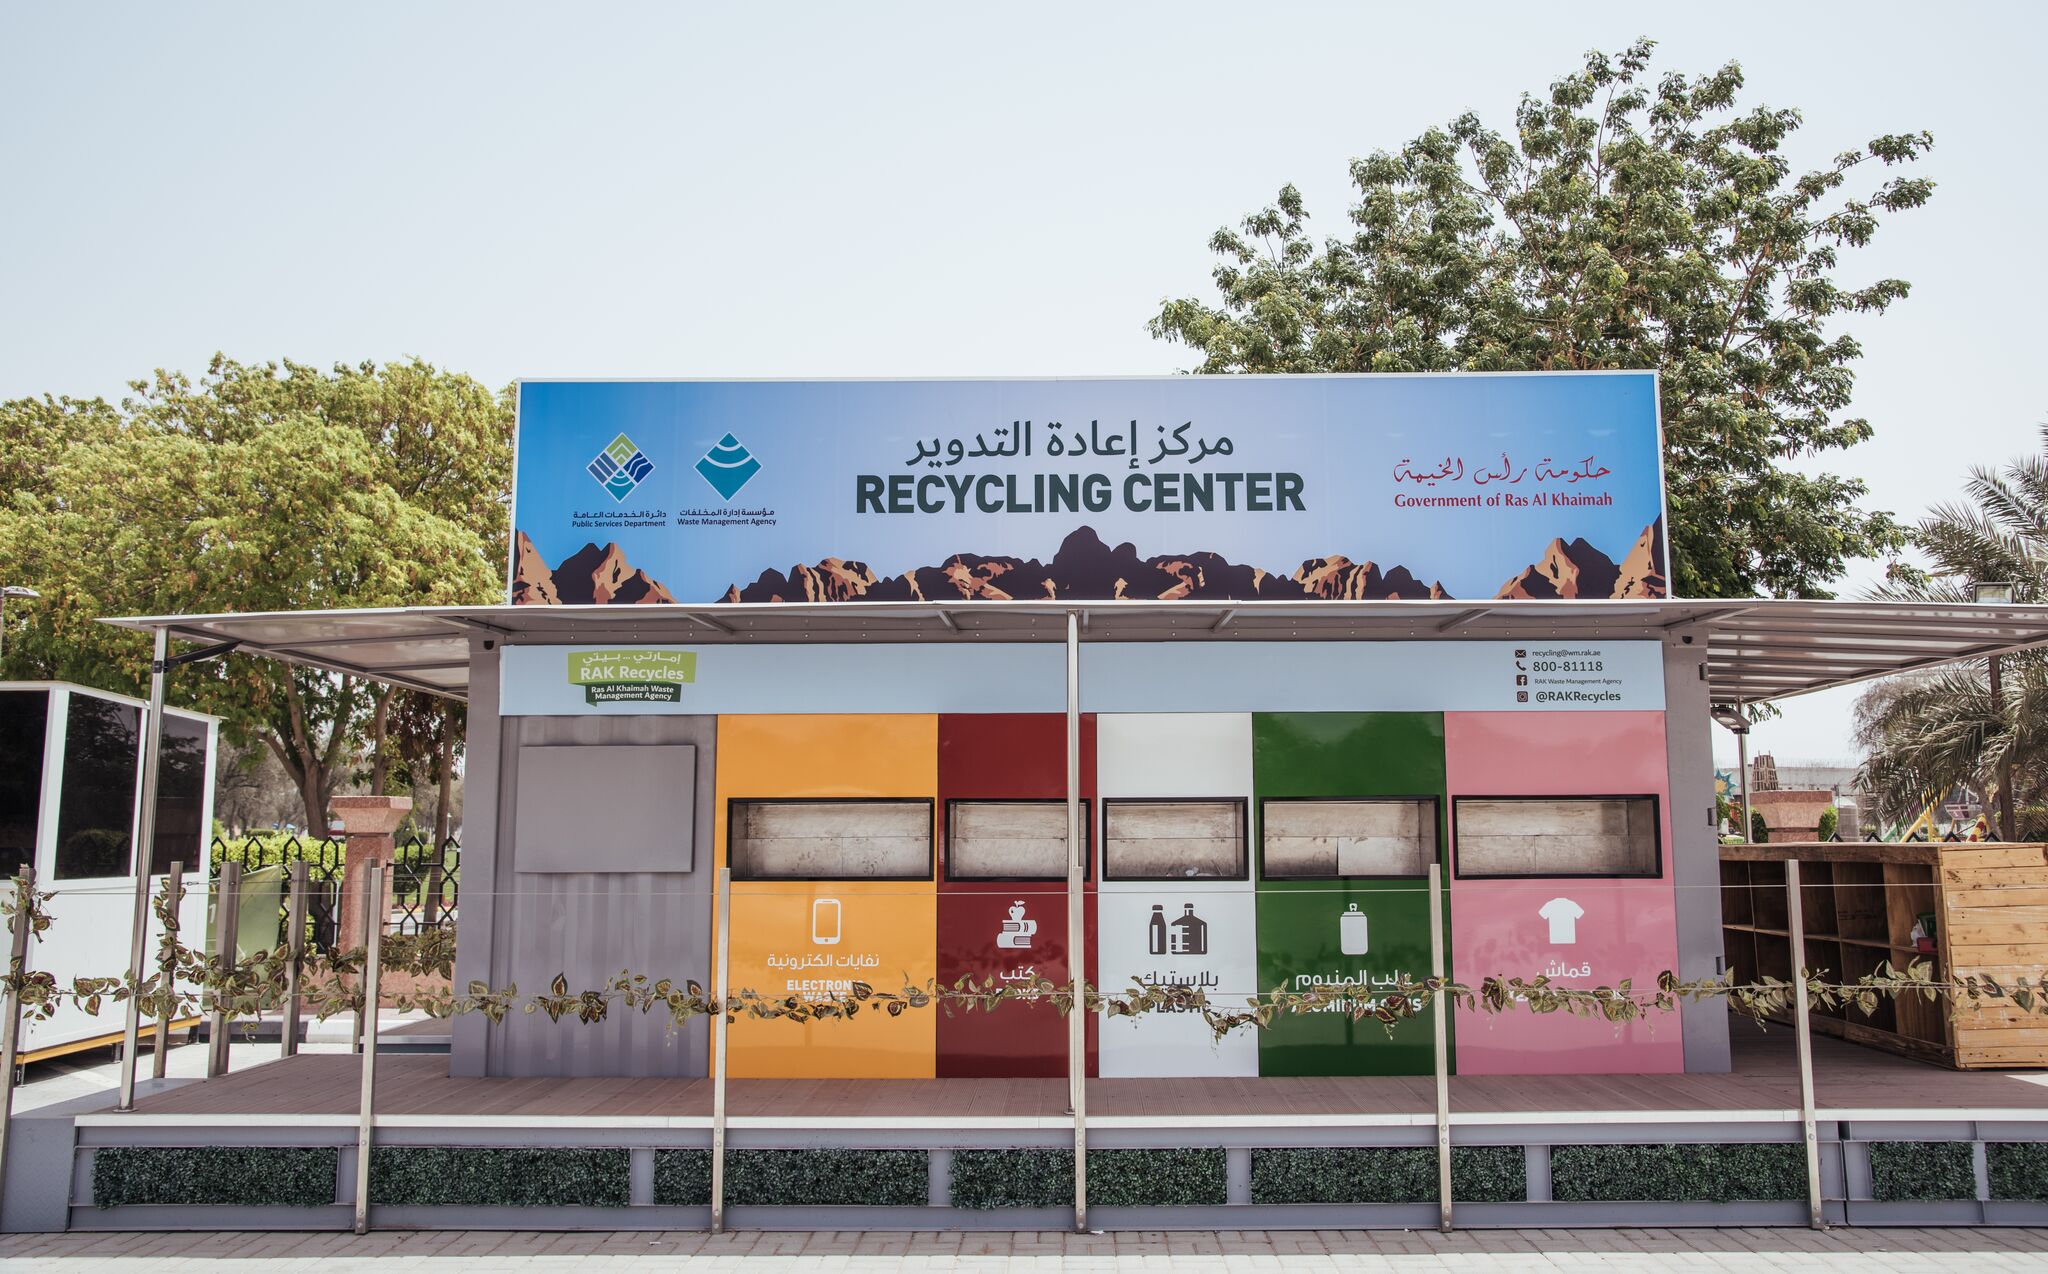 Ras Al Khaimah goes green with repurposed shipping containers - The Filipino Times2048 x 1274